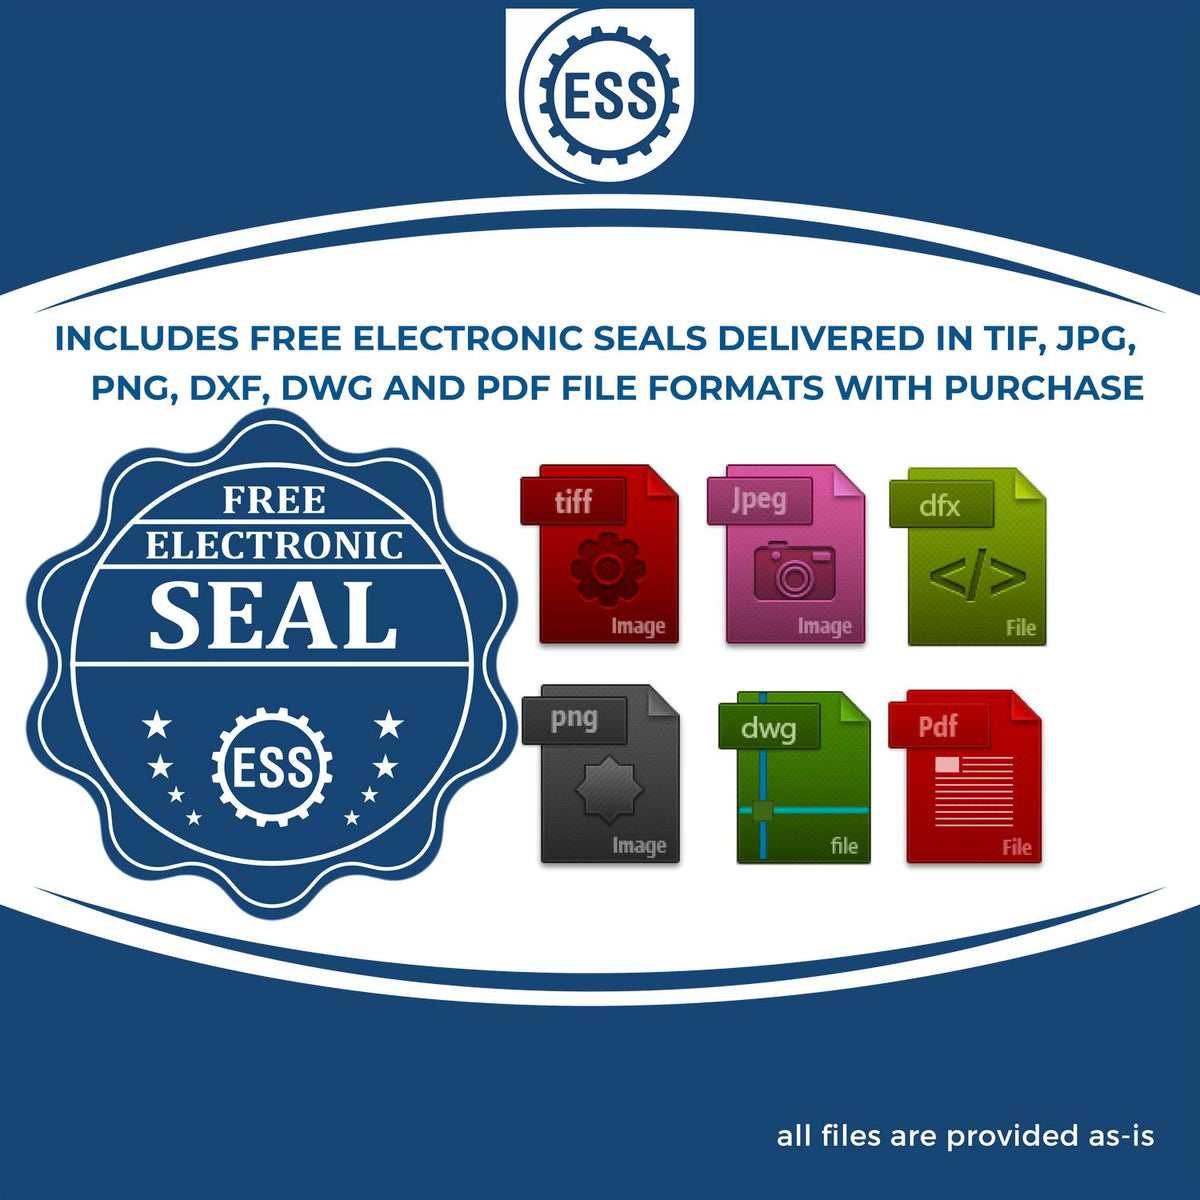 An infographic for the free electronic seal for the Gift Arkansas Engineer Seal illustrating the different file type icons such as DXF, DWG, TIF, JPG and PNG.